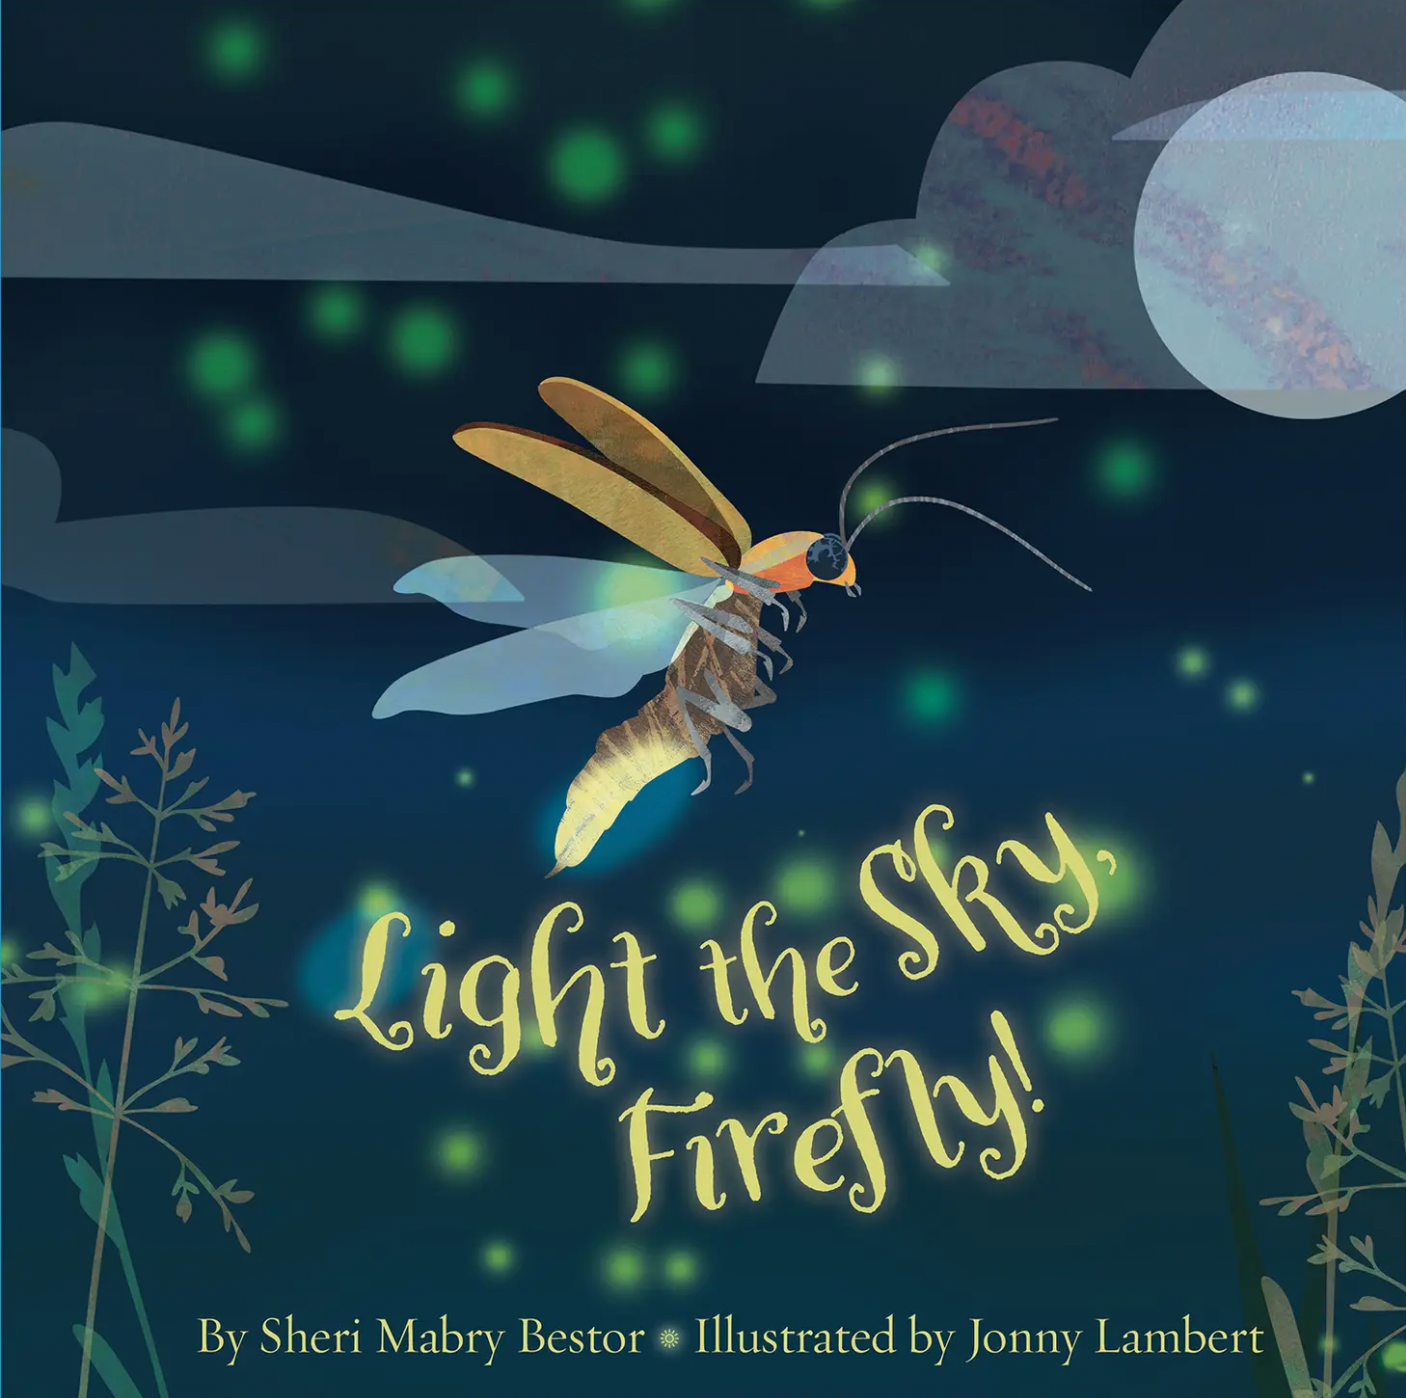 Light the Sky Firefly - Magpies Paducah